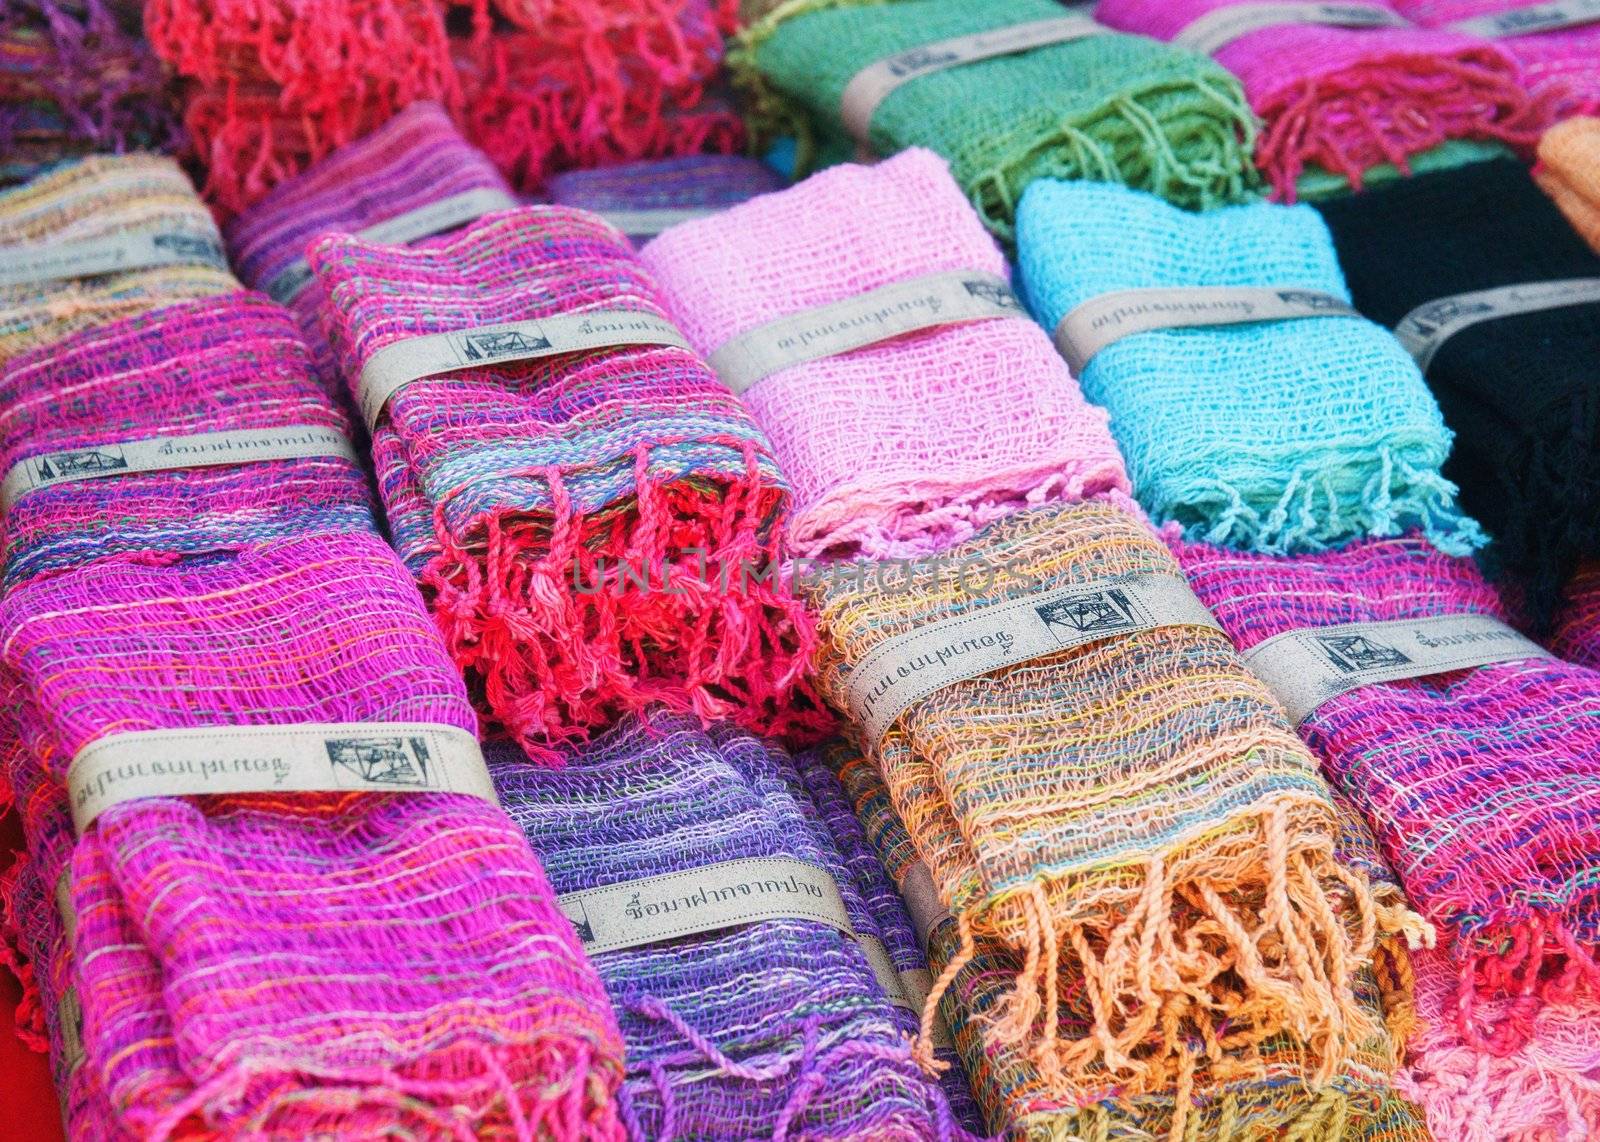 fabric for sale in markets in thailand